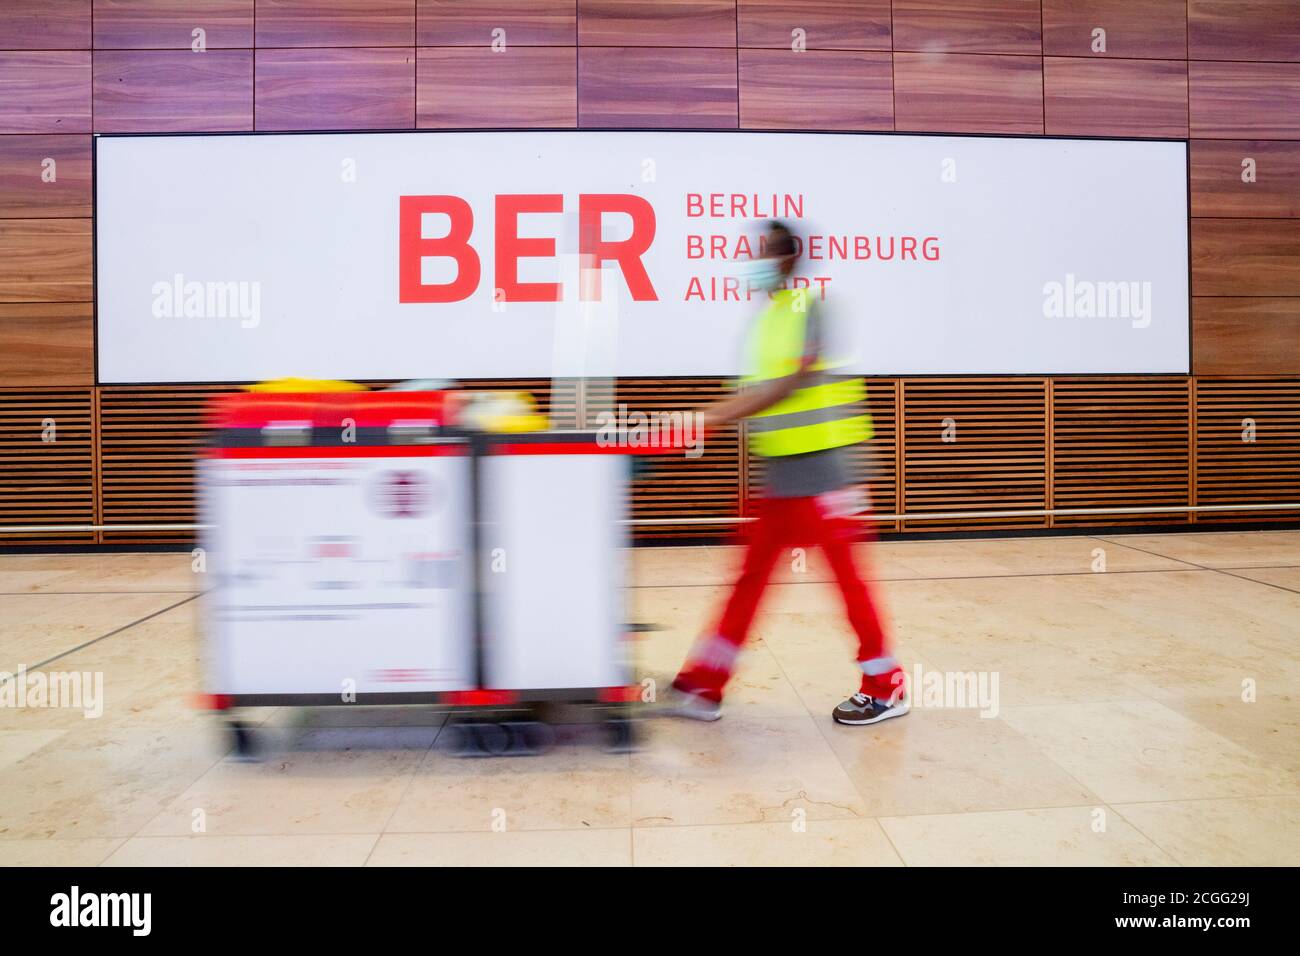 08 September 2020, Brandenburg, Schönefeld: A building cleaner pushes his trolley in front of the BER logo during a tour of Berlin Brandenburg Airport 'Willy Brandt' (BER) in Terminal T1. The capital city airport is scheduled to open on 31 October 2020. (motion blur due to long exposure time) Photo: Christoph Soeder/dpa Stock Photo